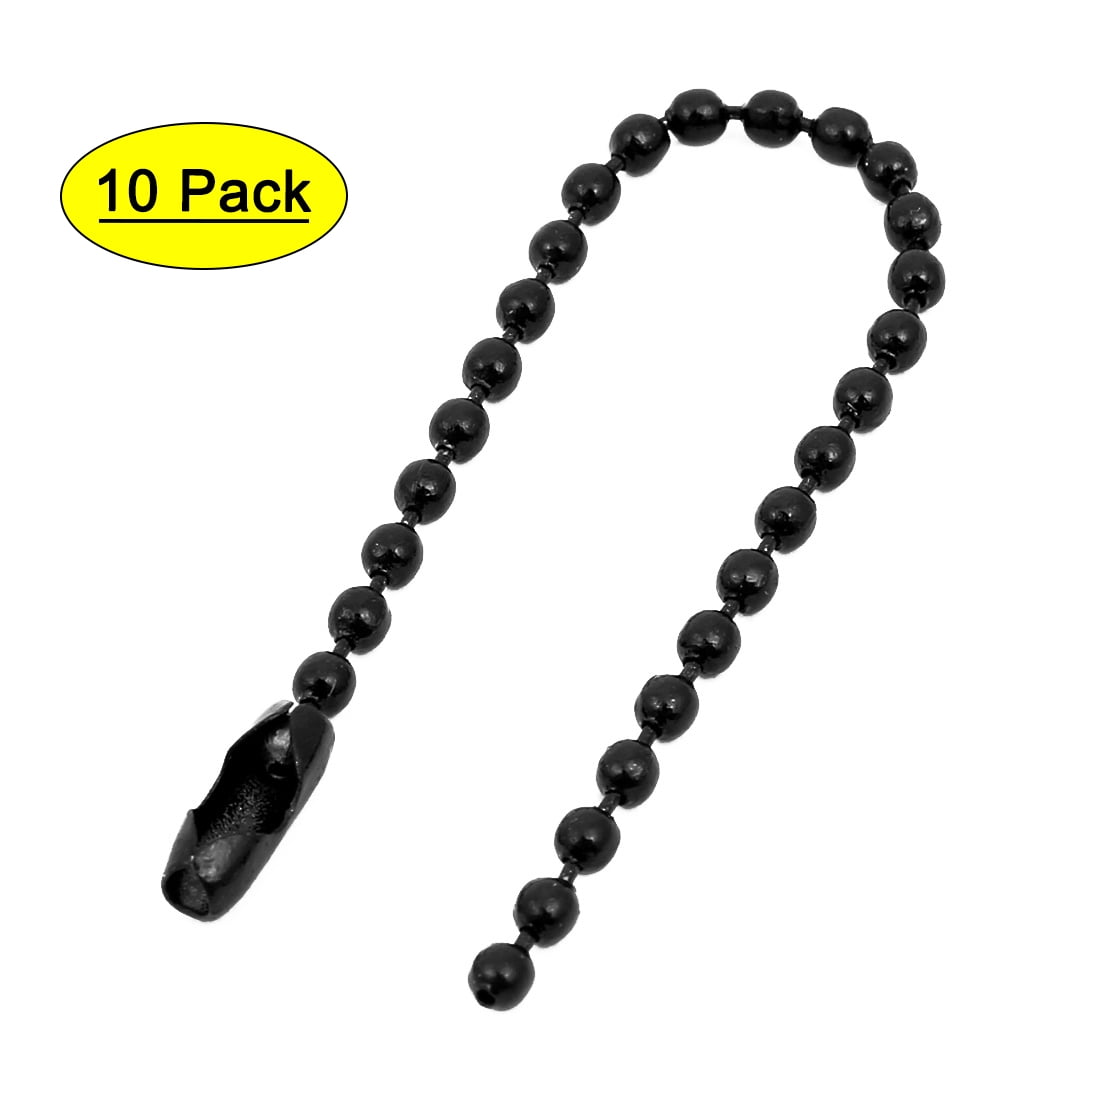 VIUJUH 150 Pcs 100mm 4inch Bead Chain,24Mm Diameter with Ball Connector Clasp Keychain Rings Metal Bead Chain Nickel Chain Dog T, Metal